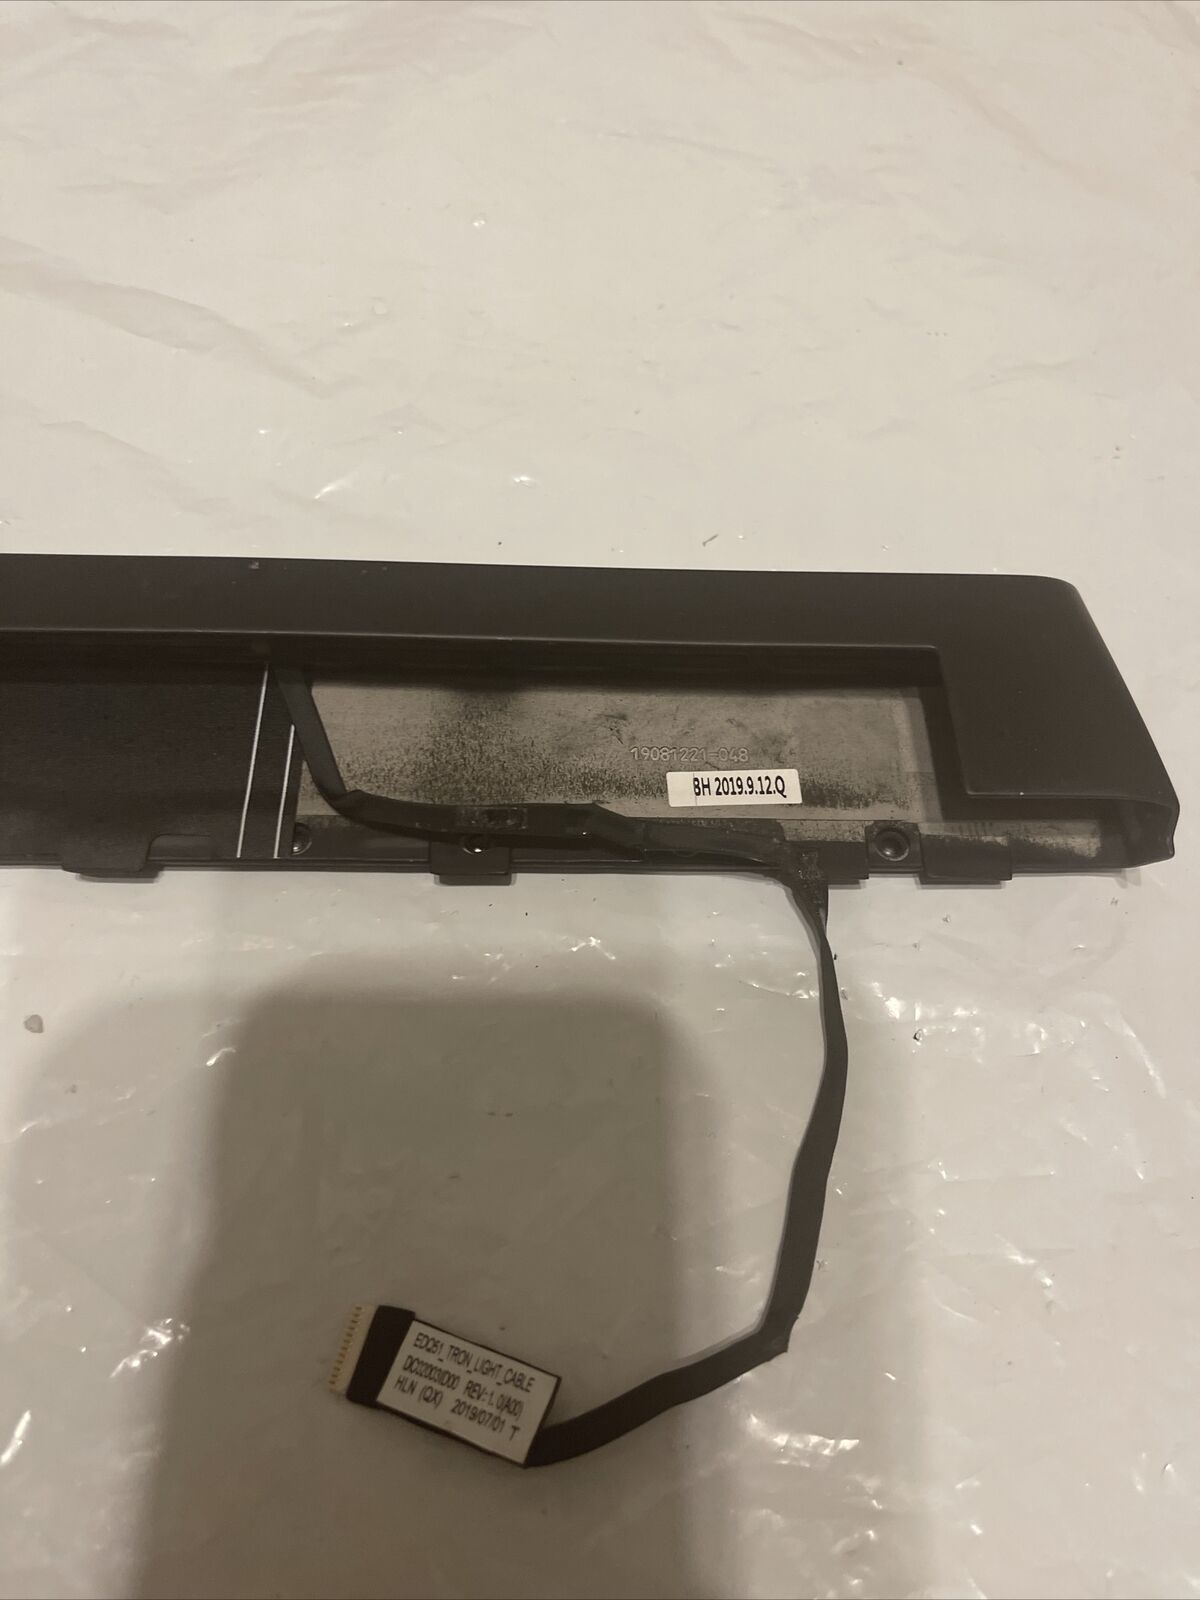 GENUINE DELL ALIENWARE M17 R2 P41E SERIES LAPTOP HINGE COVER WITH CABLE GK4RP